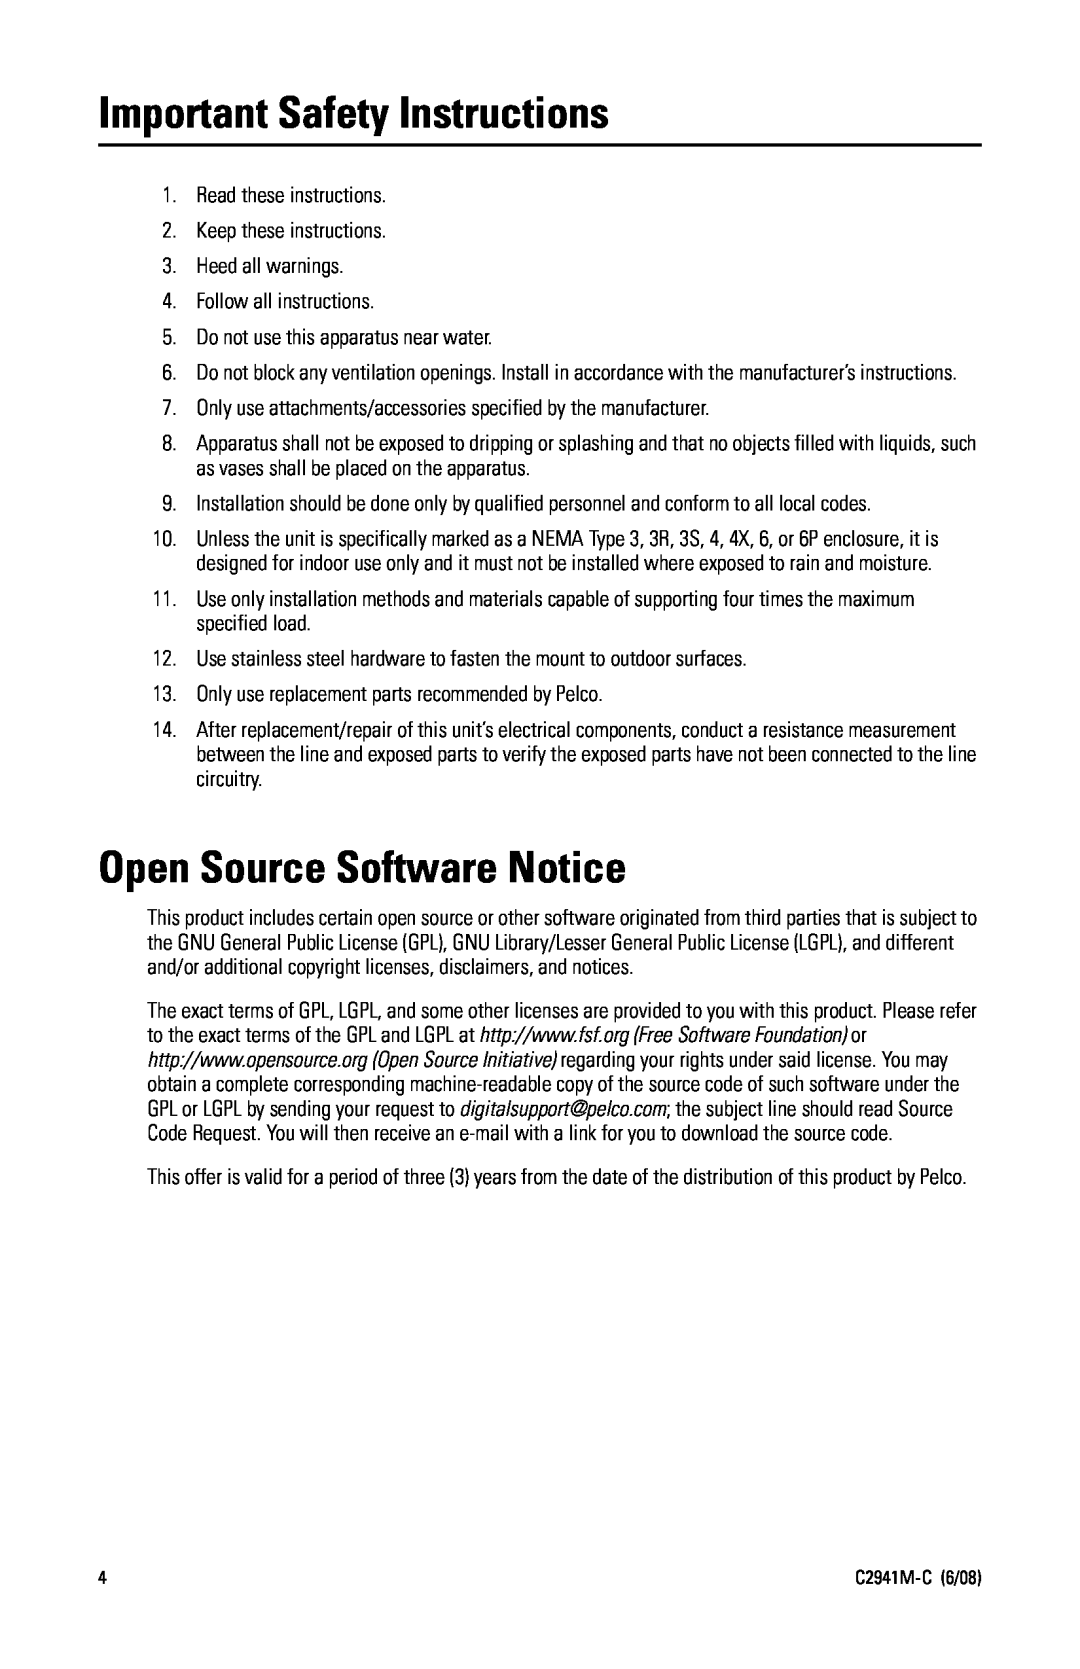 Pelco IP3701H-2 manual Important Safety Instructions, Open Source Software Notice 